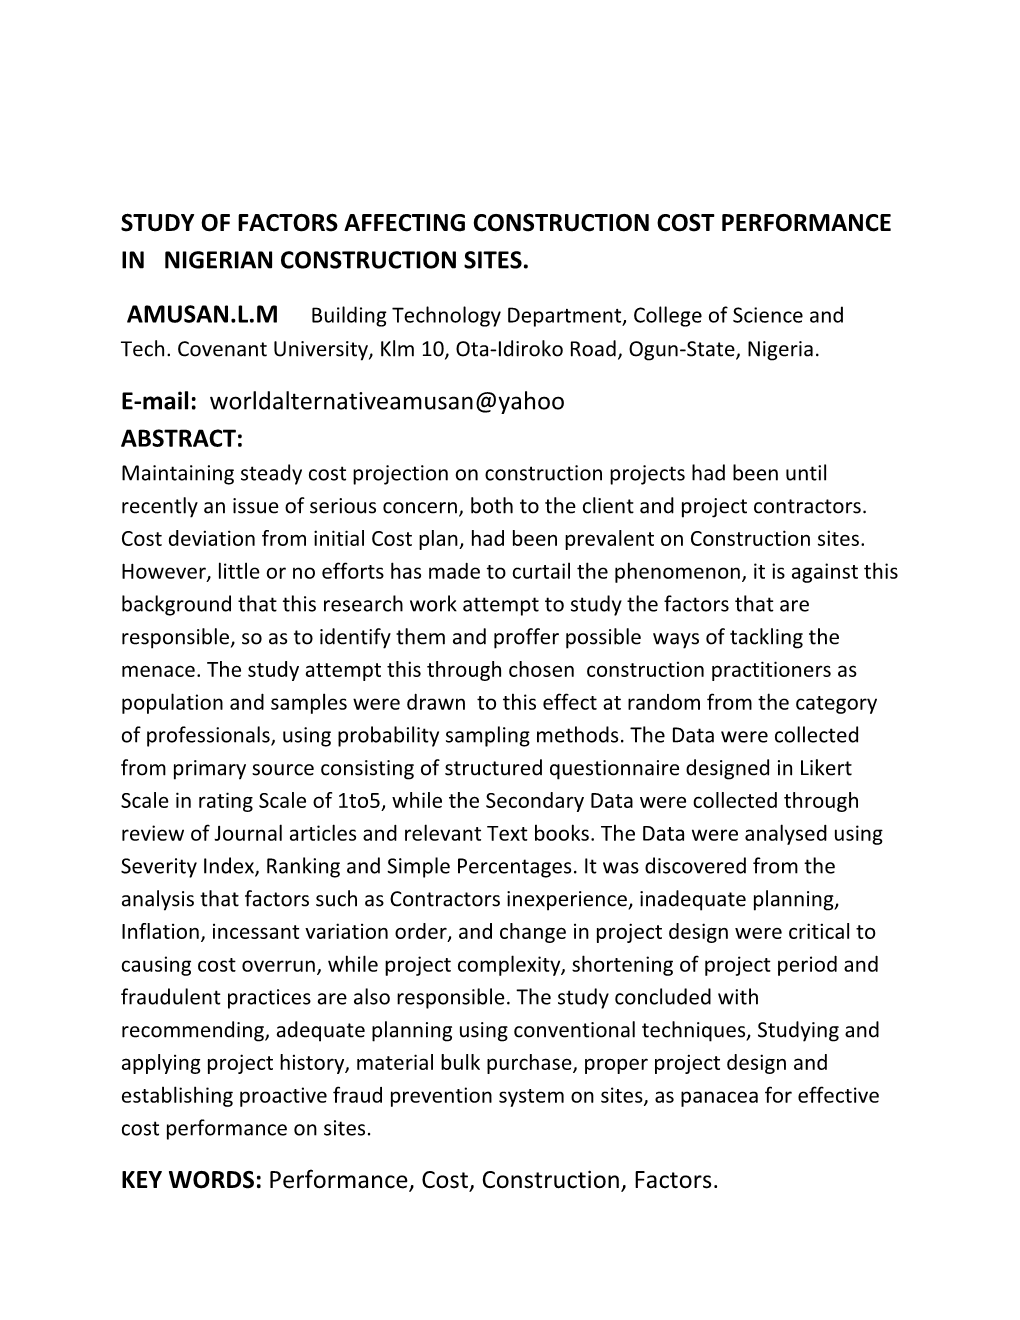 Study of Factors Affecting Construction Cost Performance in Nigerian Construction Sites